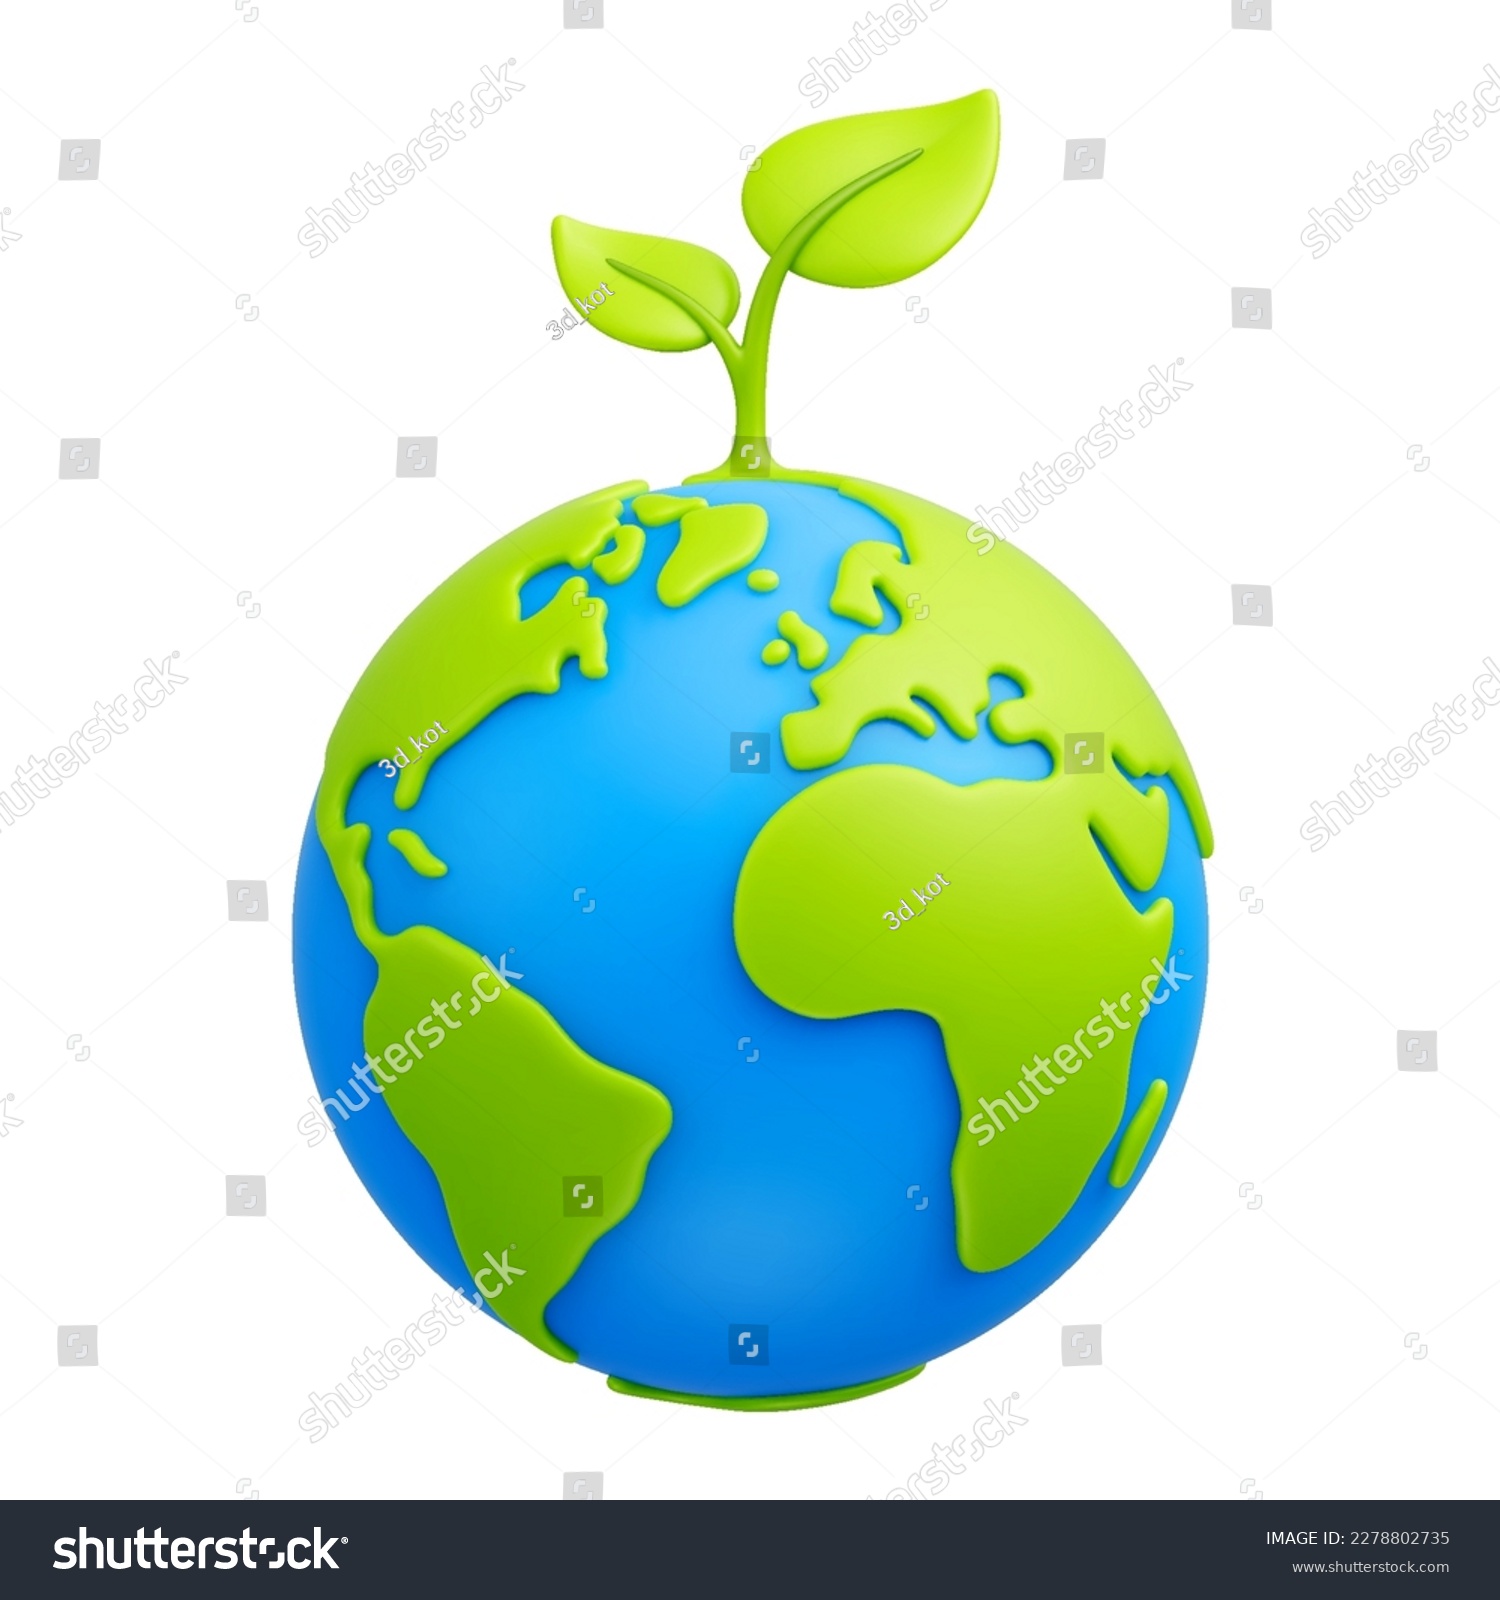 SVG of Cartoon planet Earth with green sprout and leaves 3d vector icon on white background. Earth day, ecology, nature and environment conservation concept. Save green planet concept svg